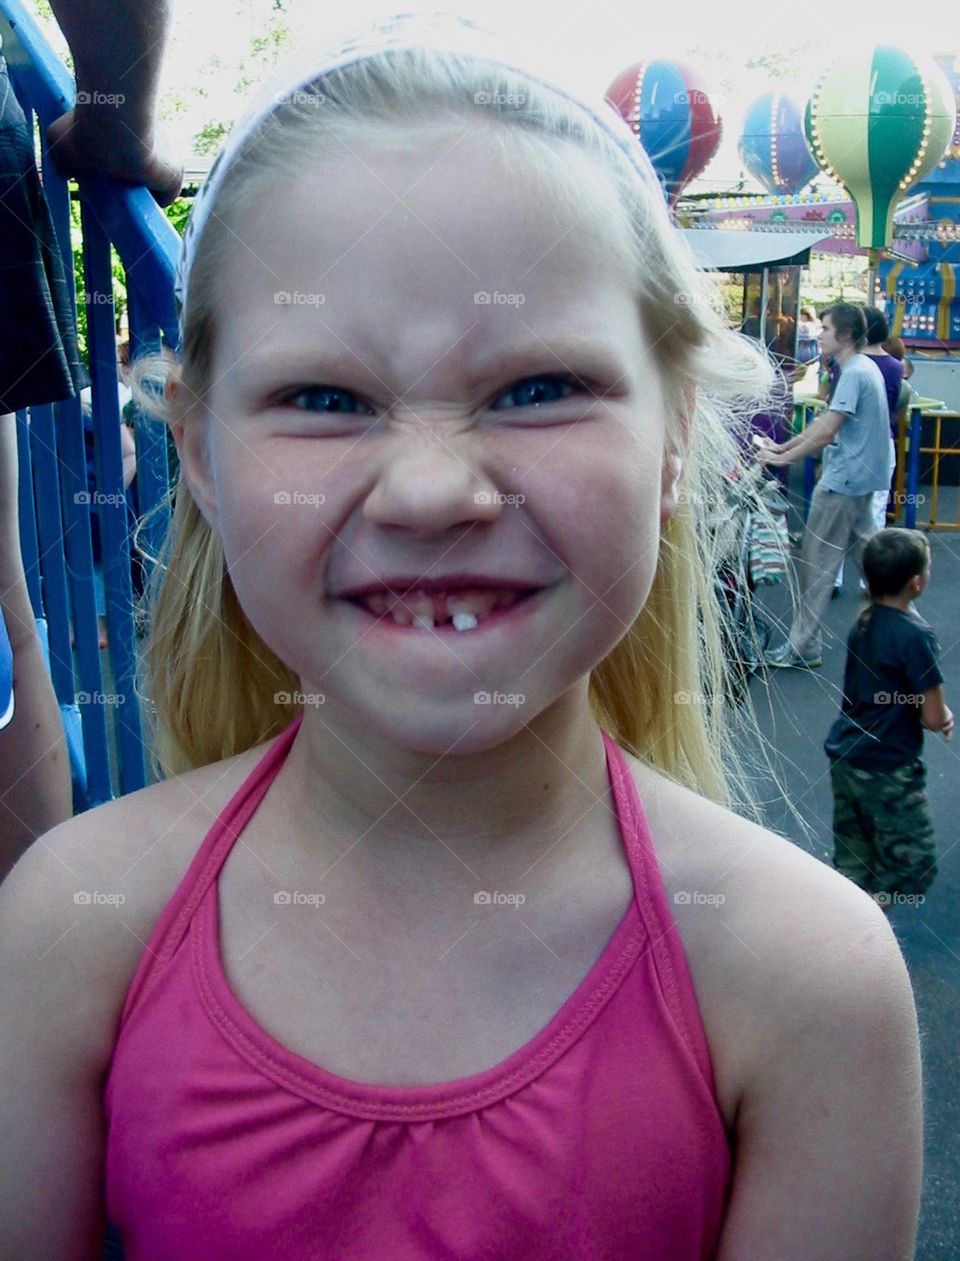 Girl is just about to loose her milk tooth i  amusementpark. And so proud of it😊